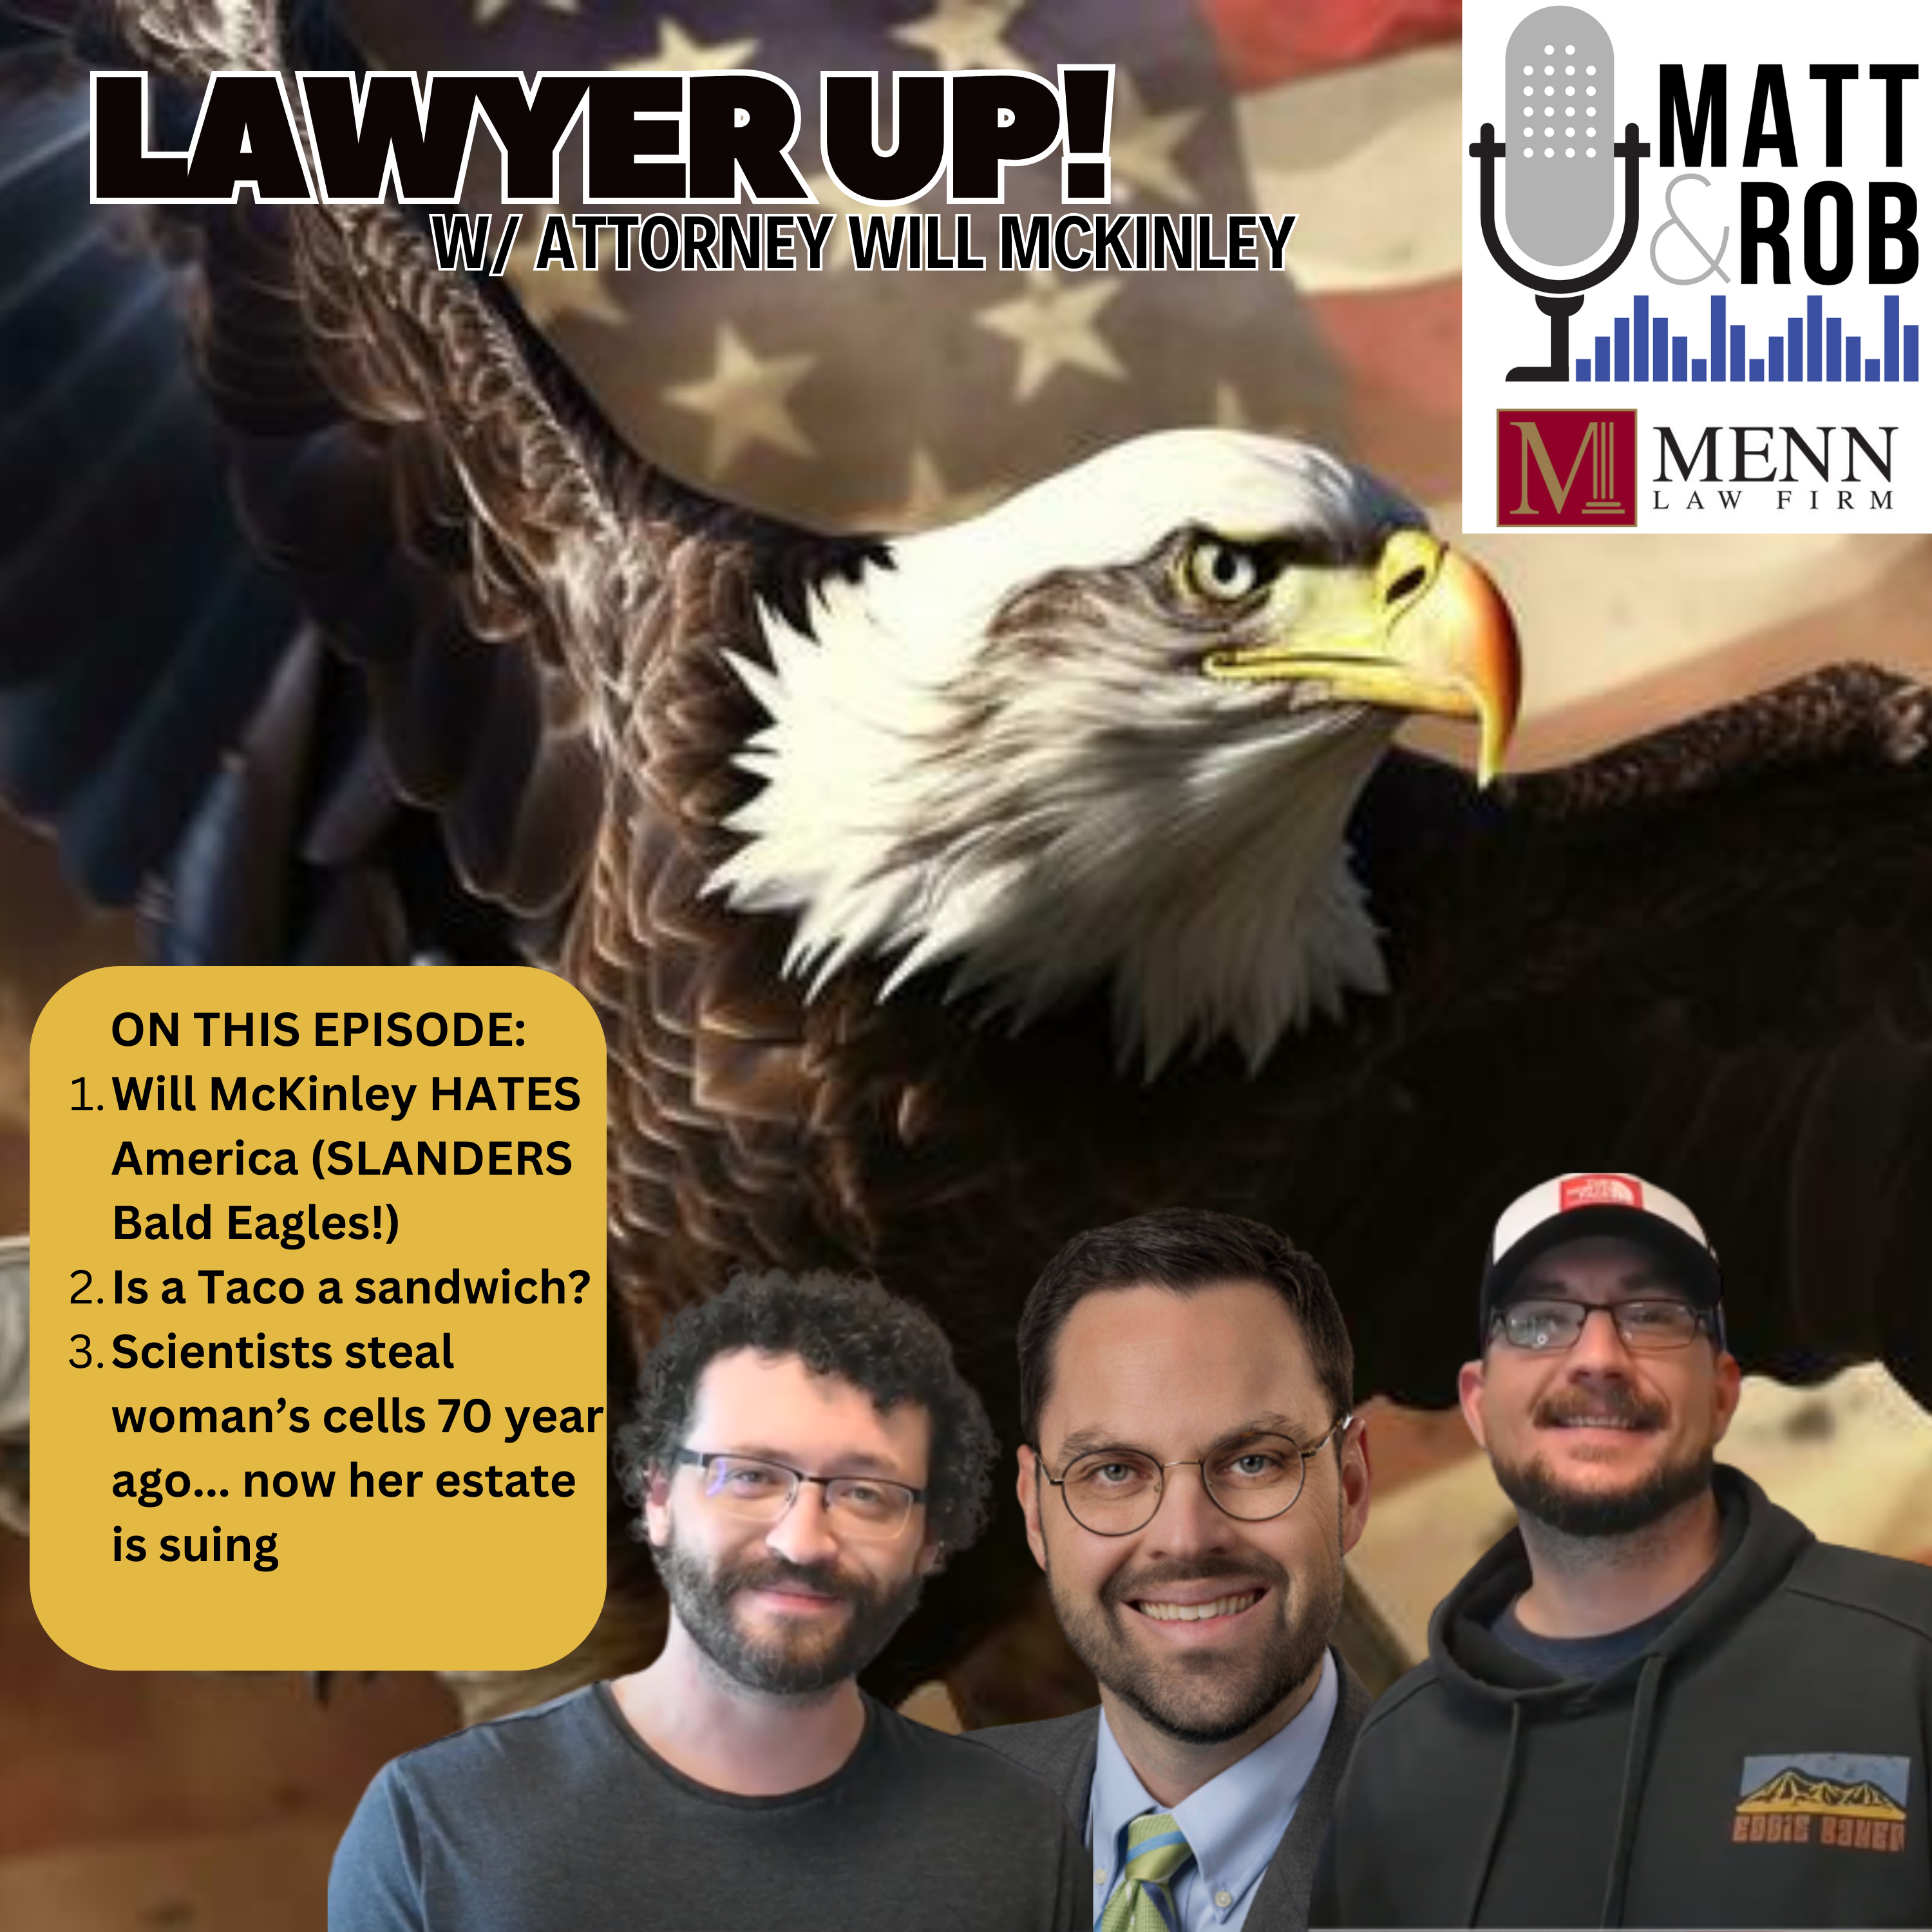 Lawyer Up! w/ Will McKinley of the Menn Law Firm: Bald Eagle Tacos